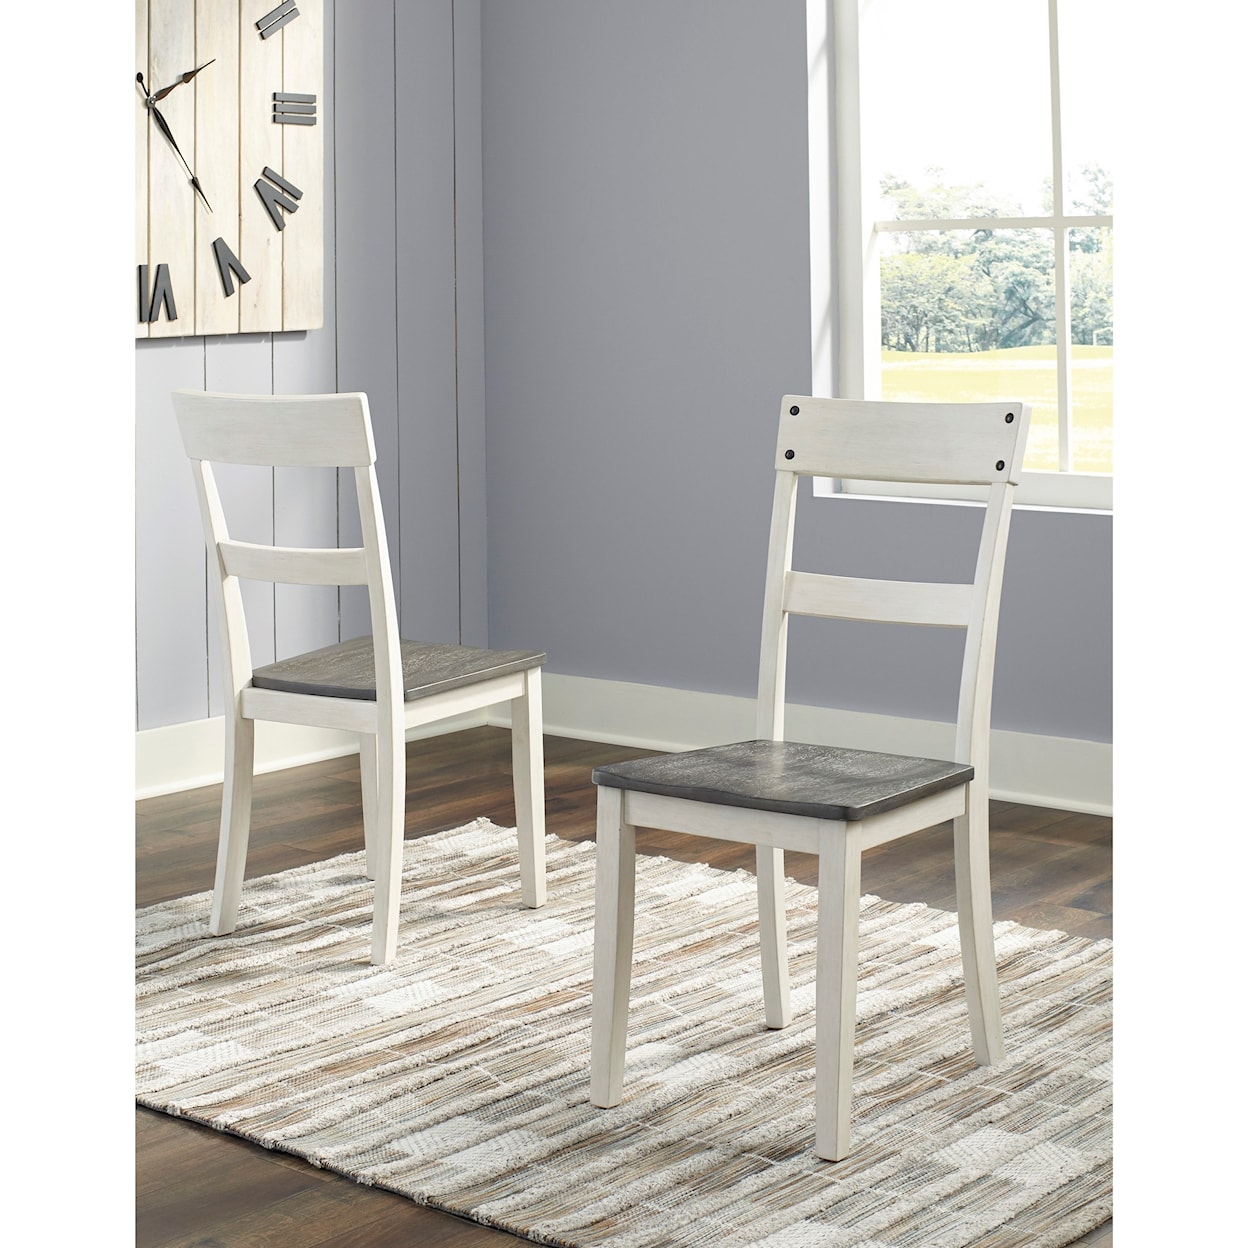 Benchcraft Nelling Dining Room Side Chair